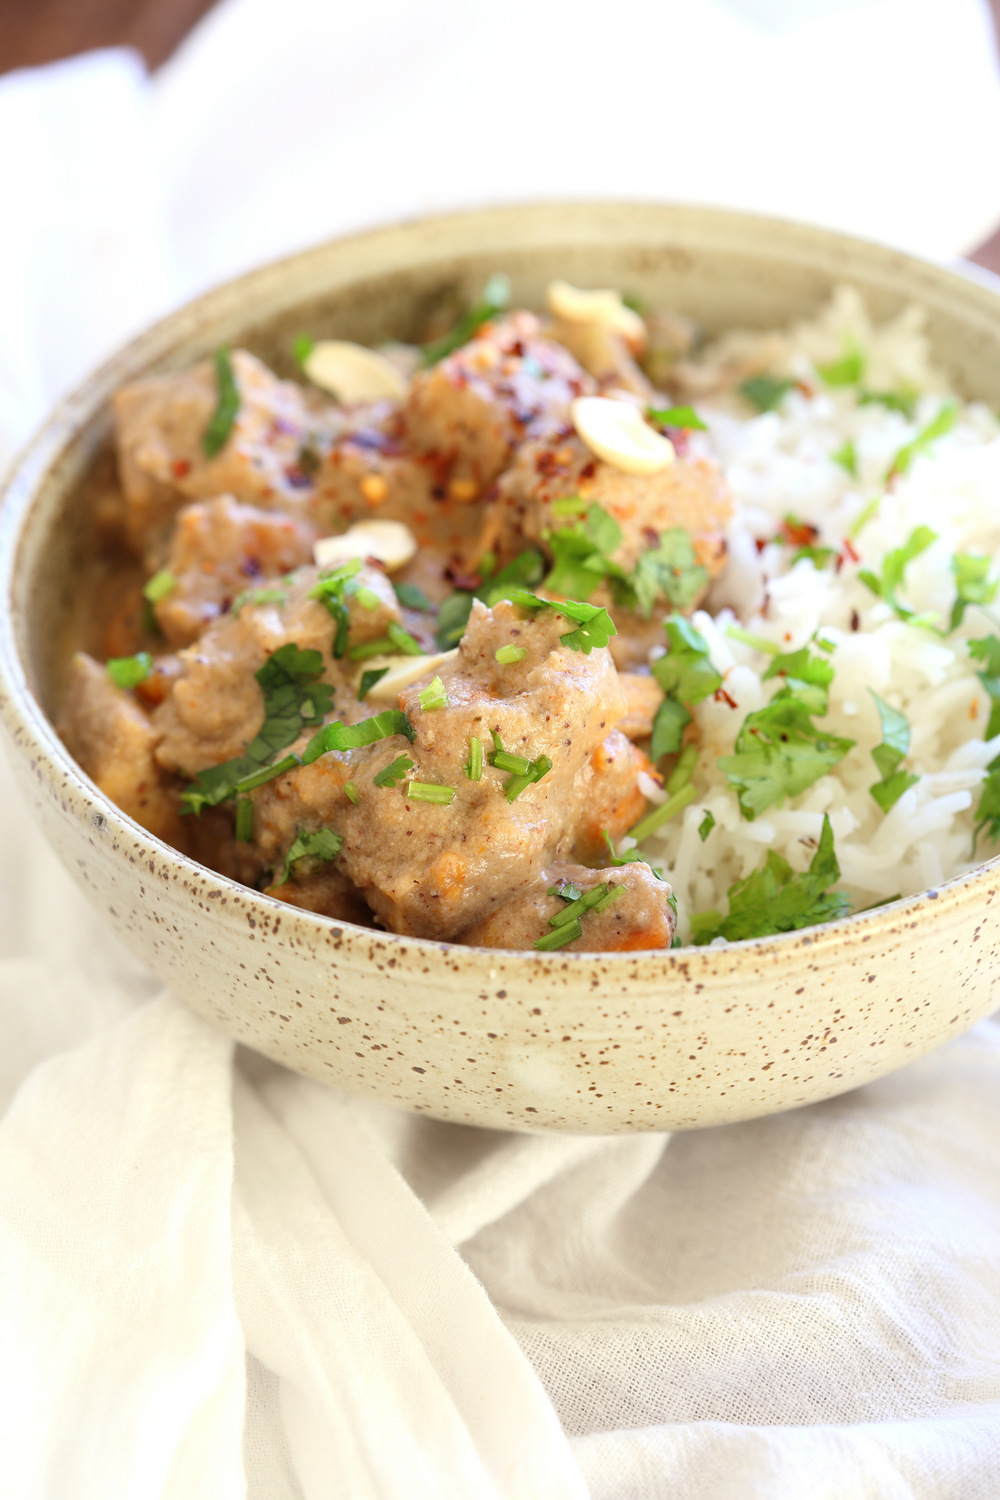 Our Vegan Korma Recipe with Rice in a speckled bowl